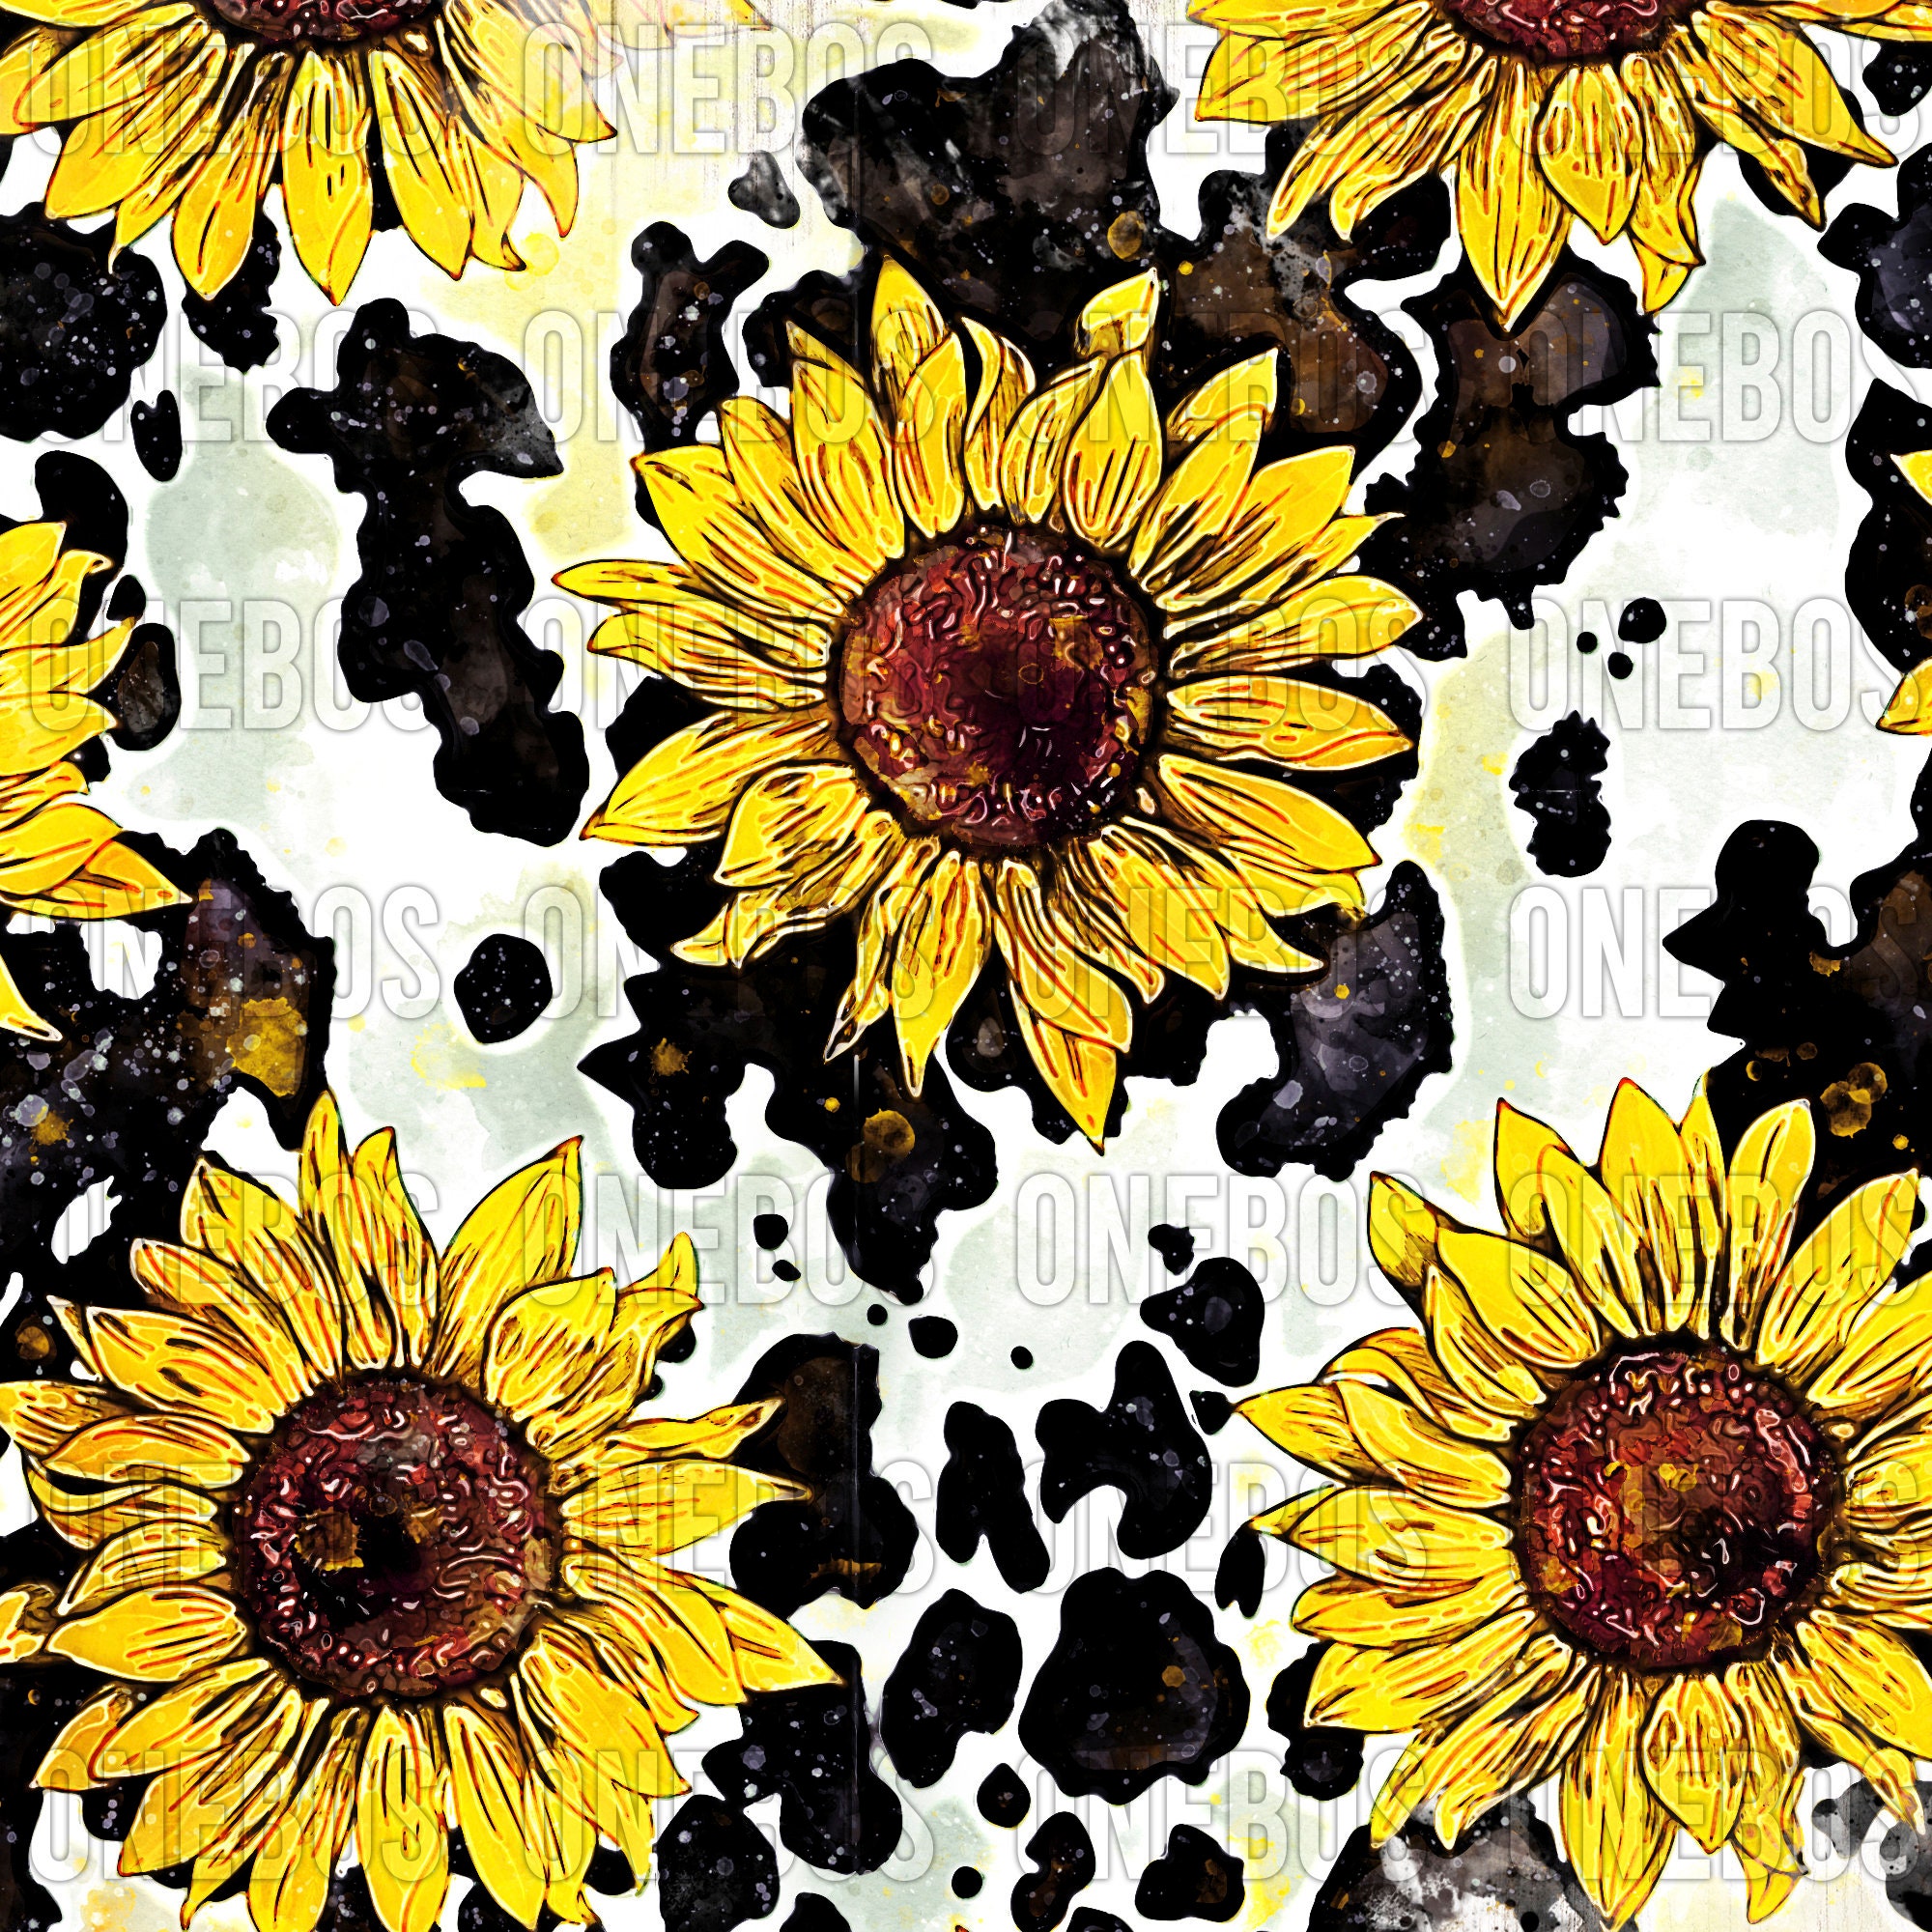 Share 55+ cow print and sunflower wallpaper - in.cdgdbentre